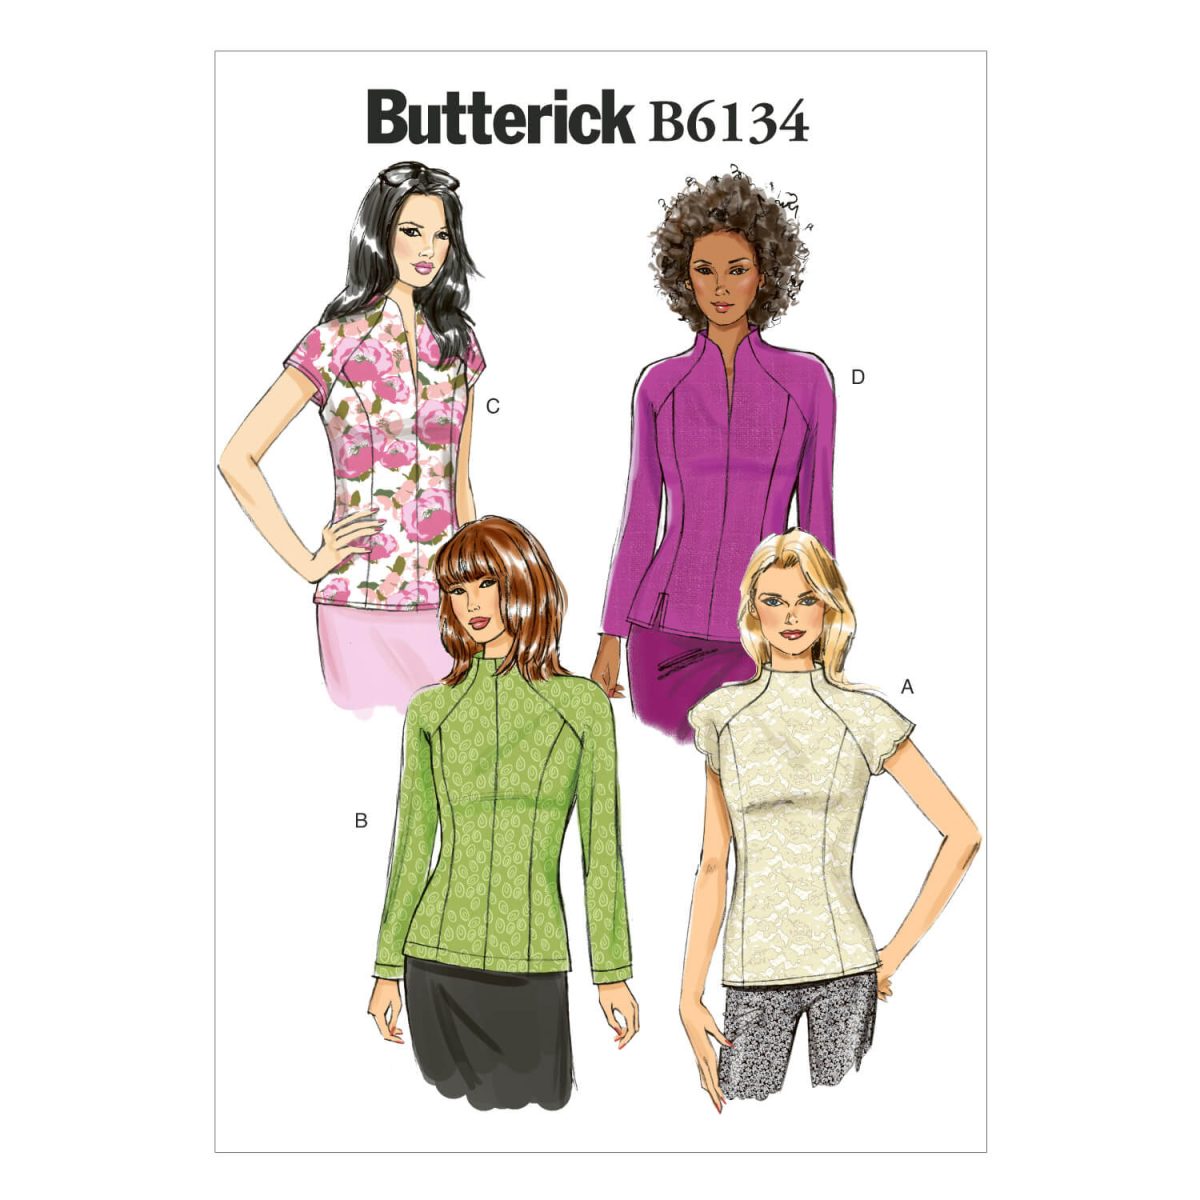 Butterick Sewing Pattern B6134 Misses' Top